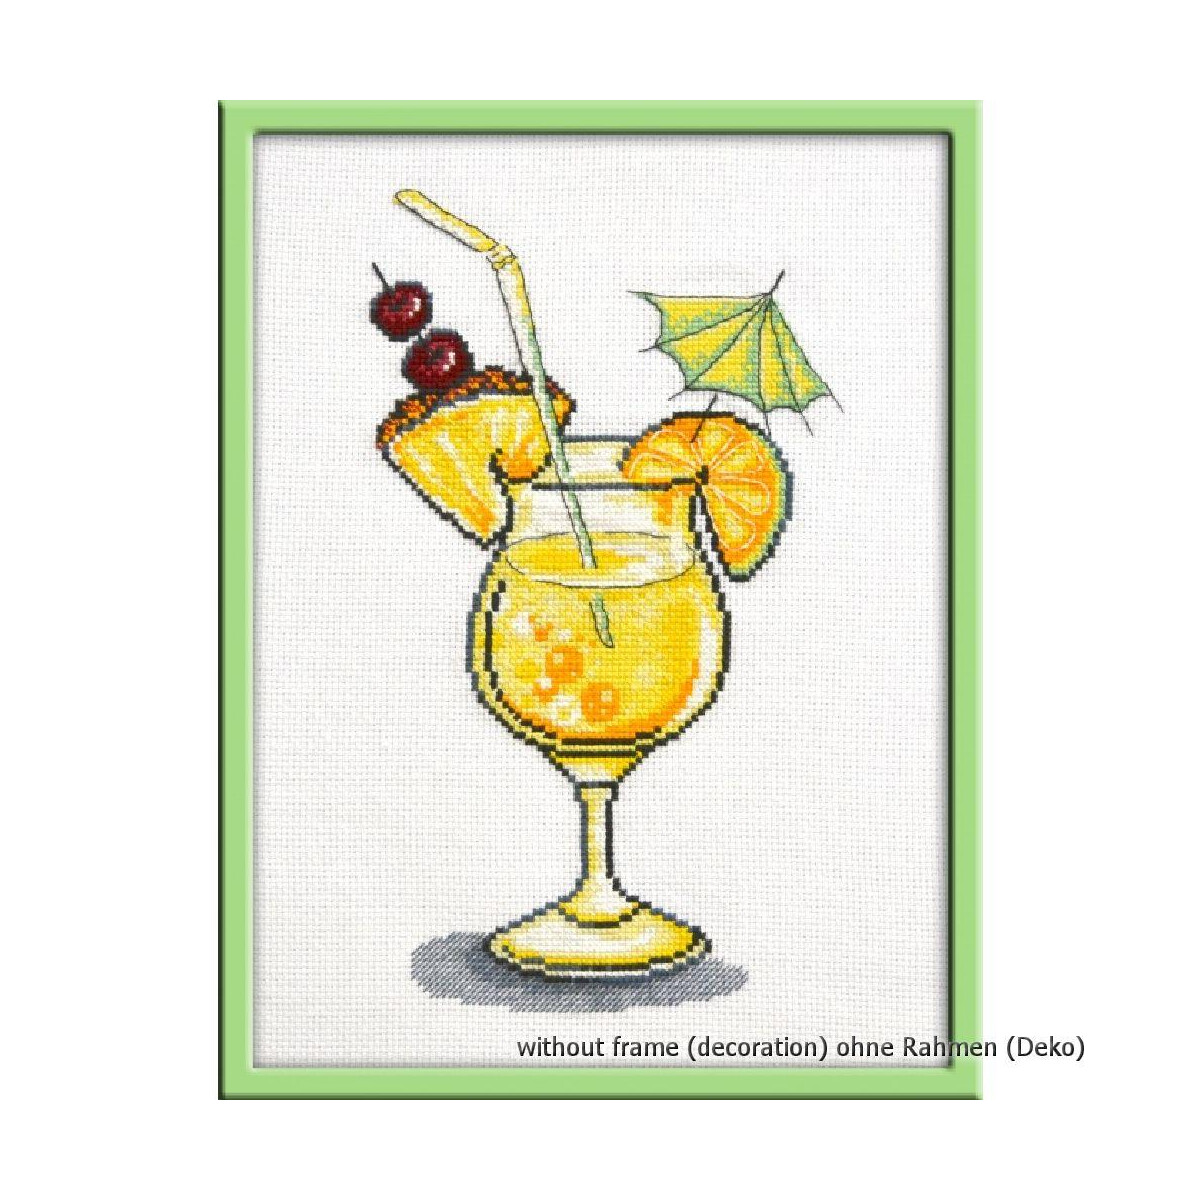 Oven counted cross stitch kit "Pina colada",...